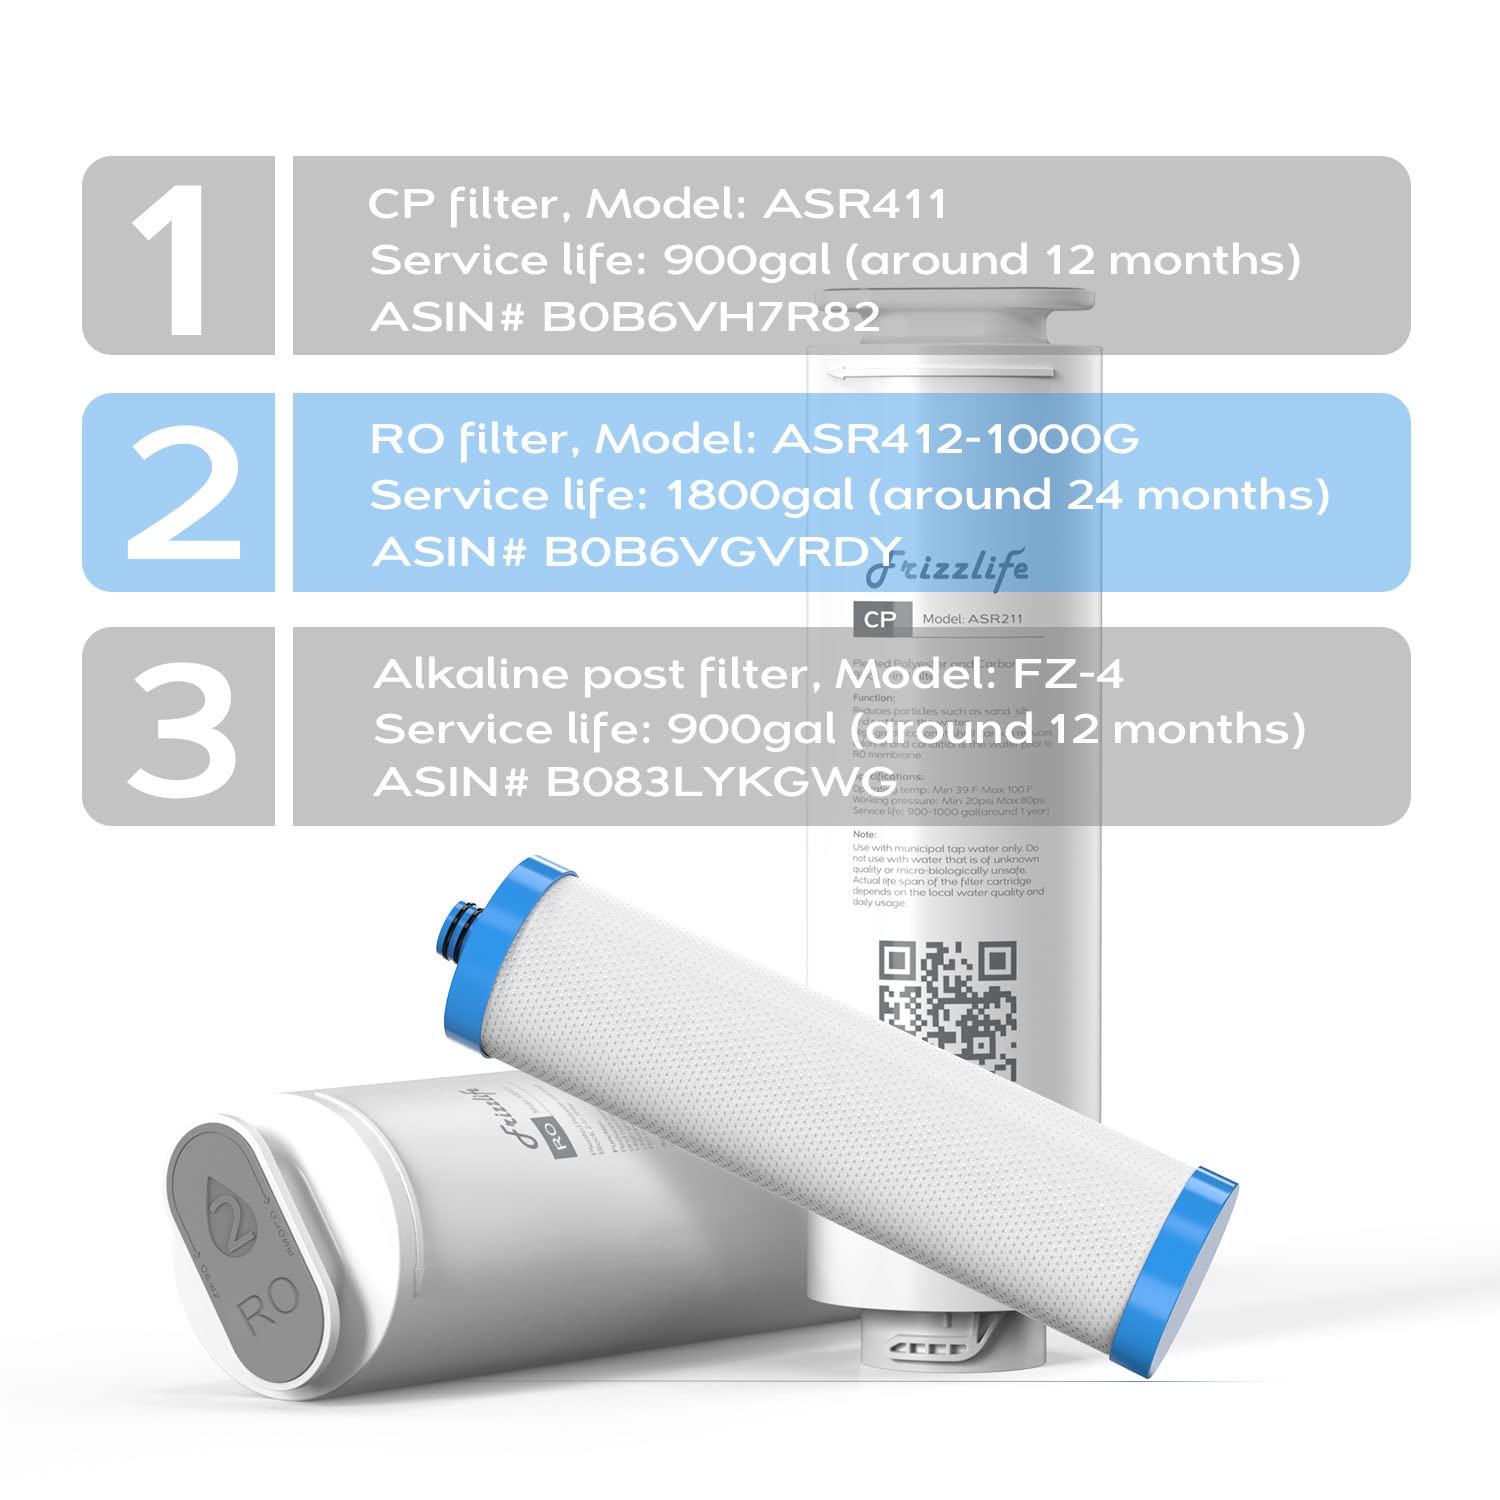 Frizzlife RO Reverse Osmosis Water Filtration System - 1000 GPD Fast Flow, Tankless, Alkaline Mineral PH, Household and Commercial Usage, PD1000-TAM4, with Two Year Replacement Filters